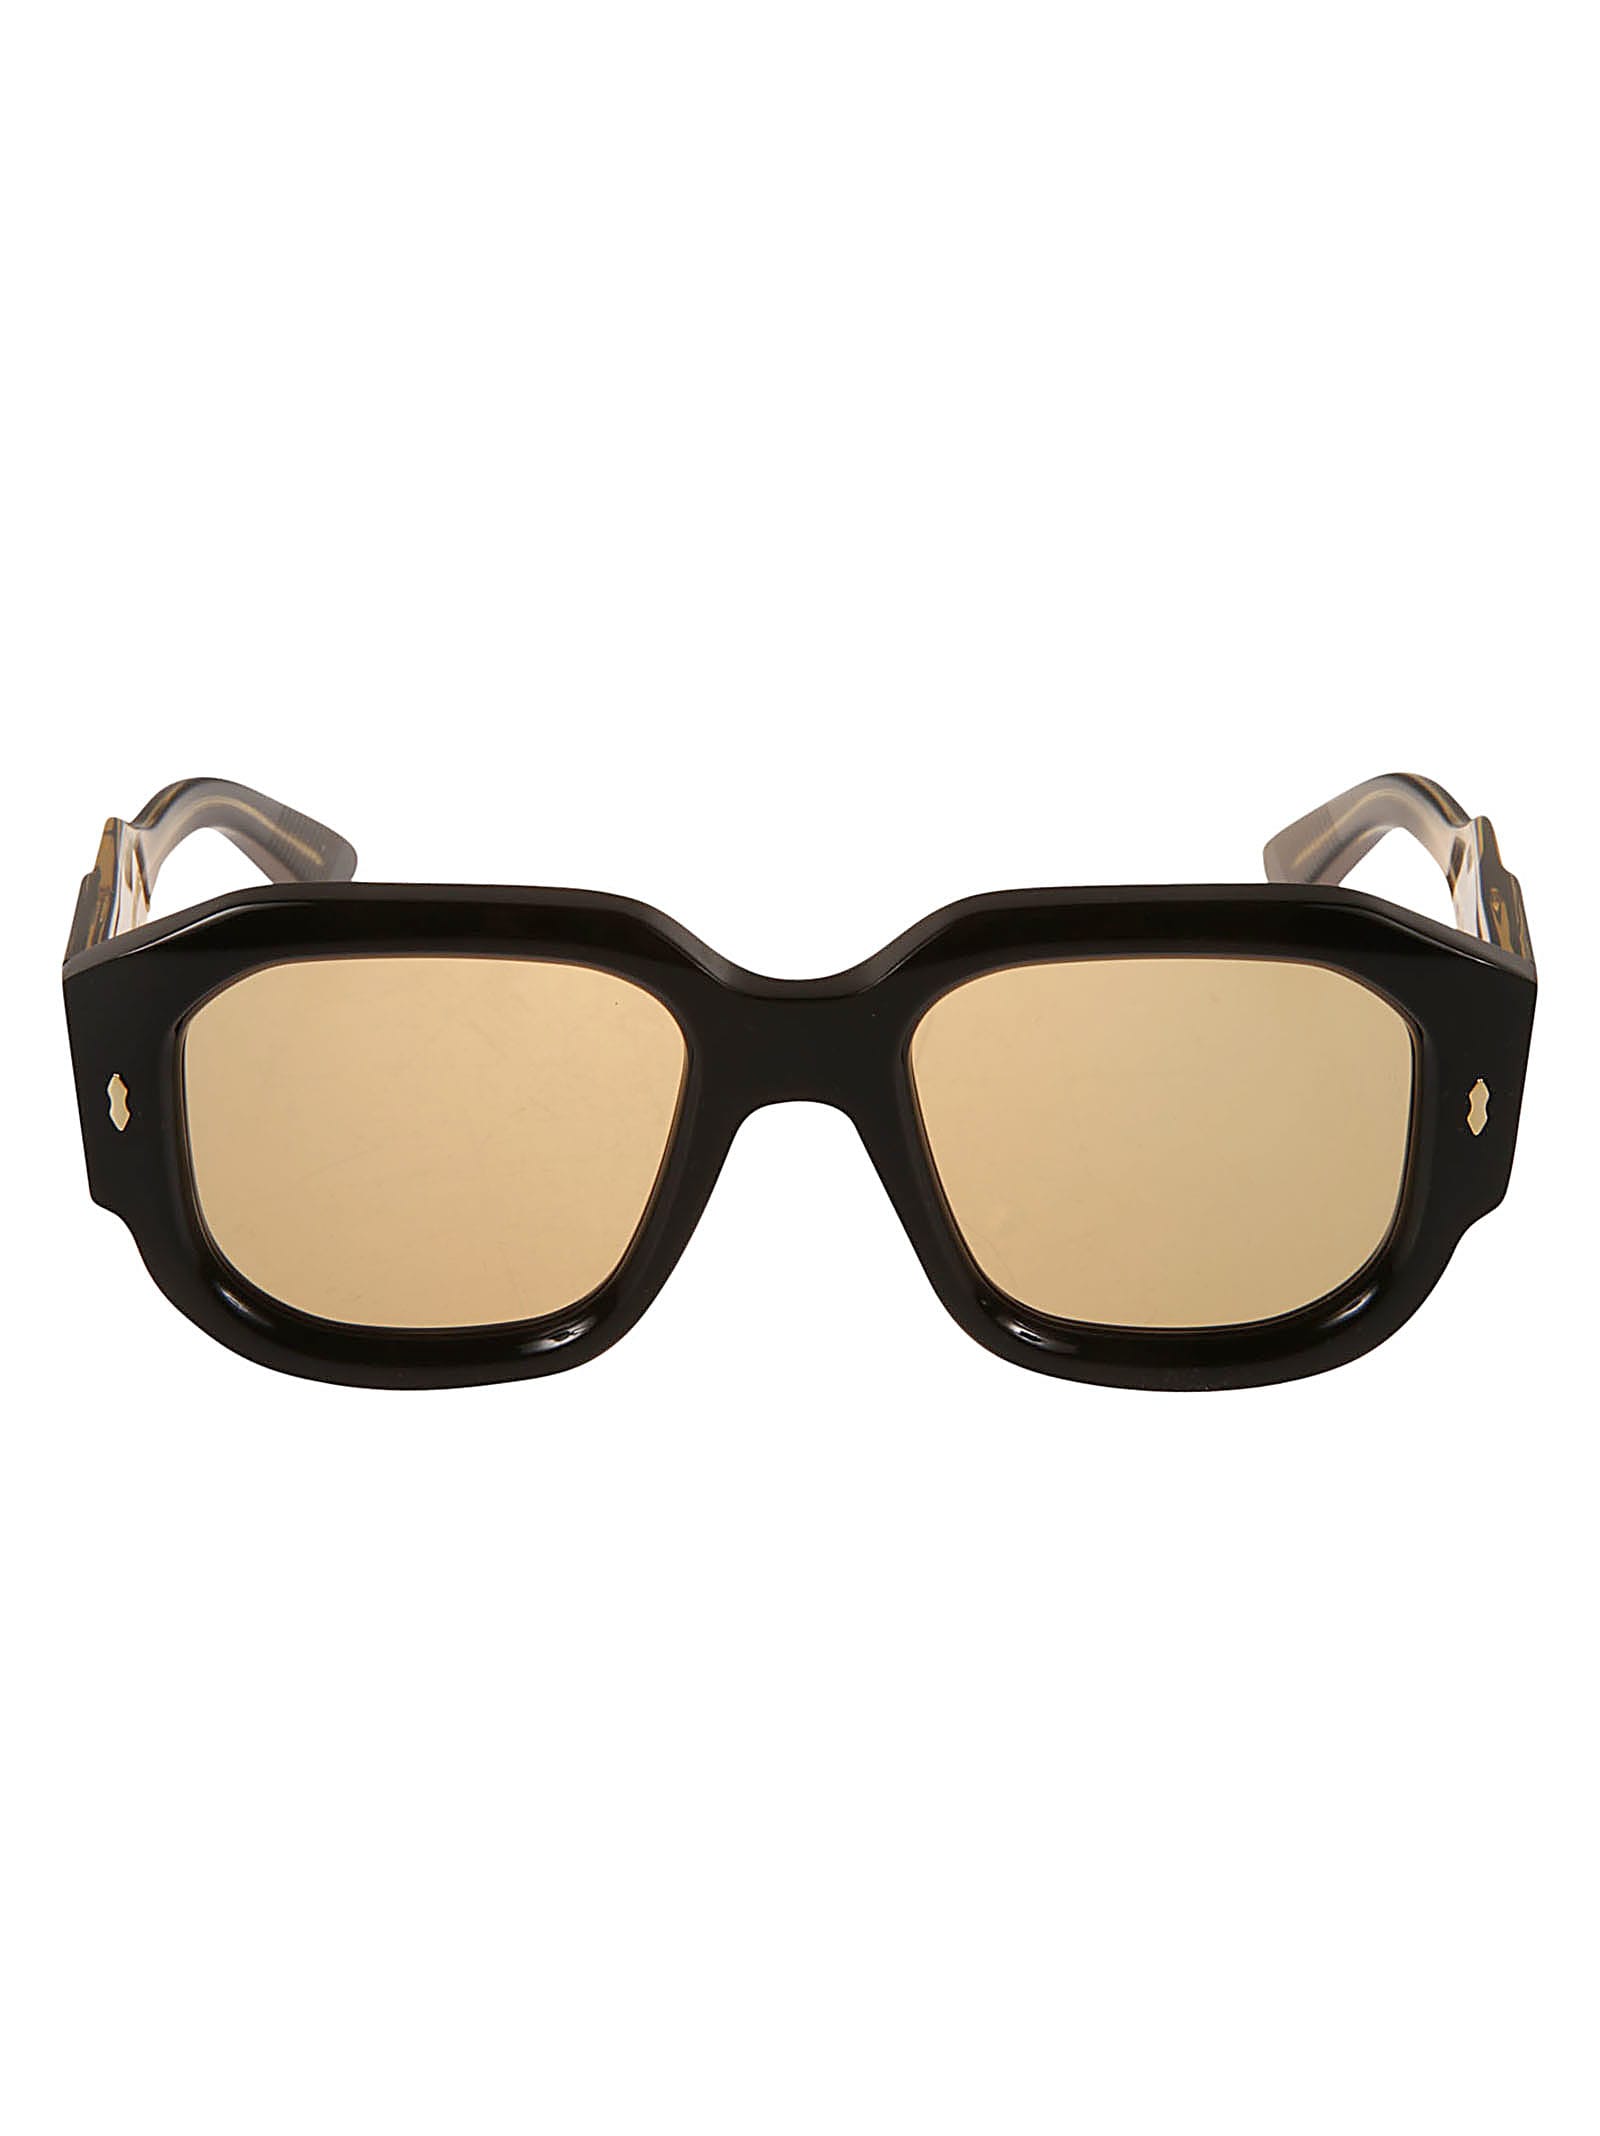 Jacques Marie Mage Lacy Sunglasses